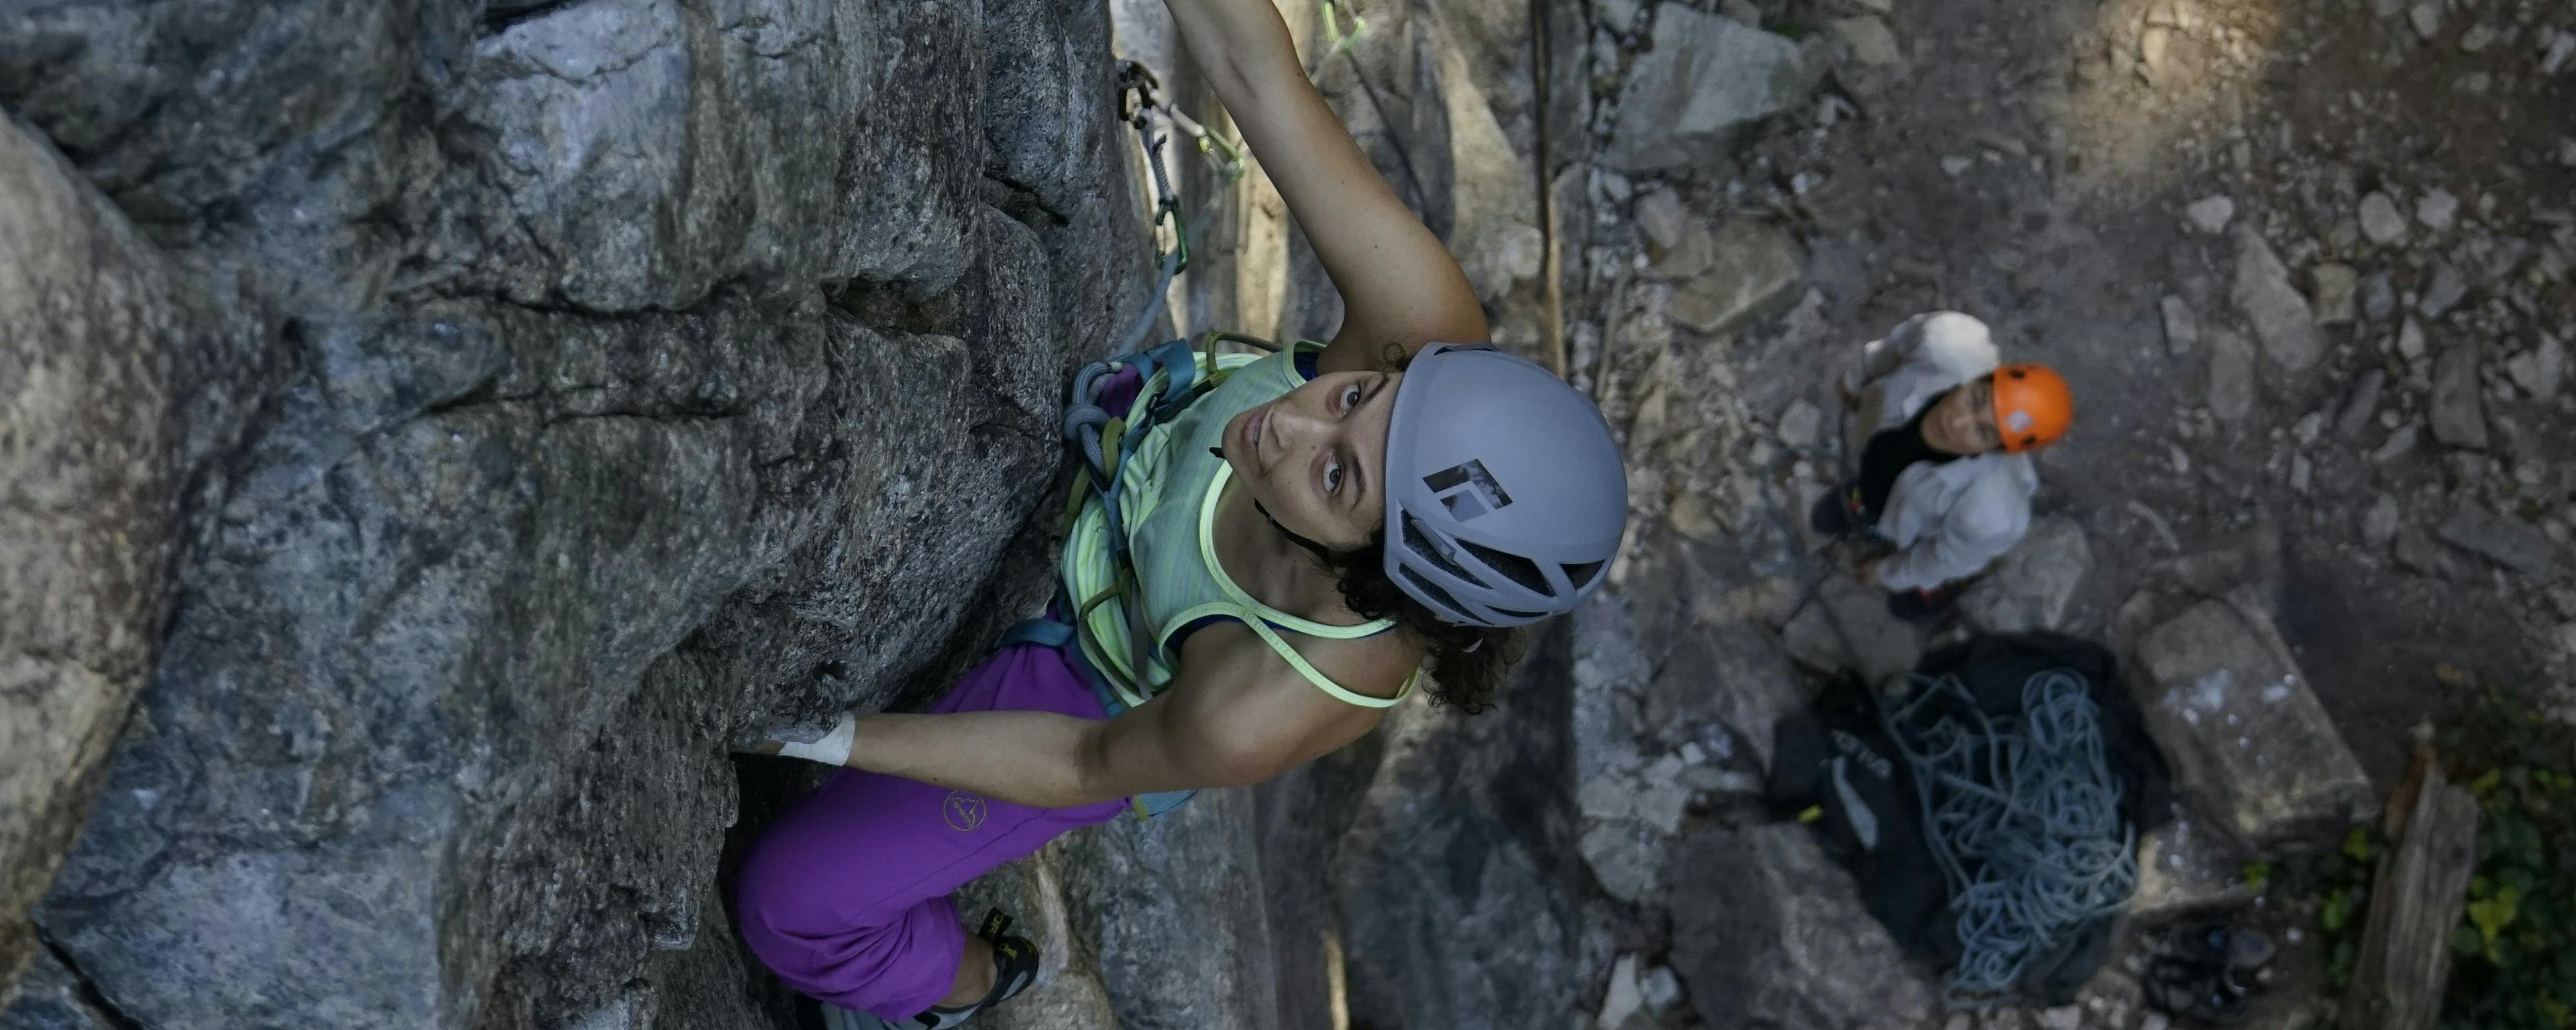 Crag etiquette: the do’s and don’ts of climbing outside